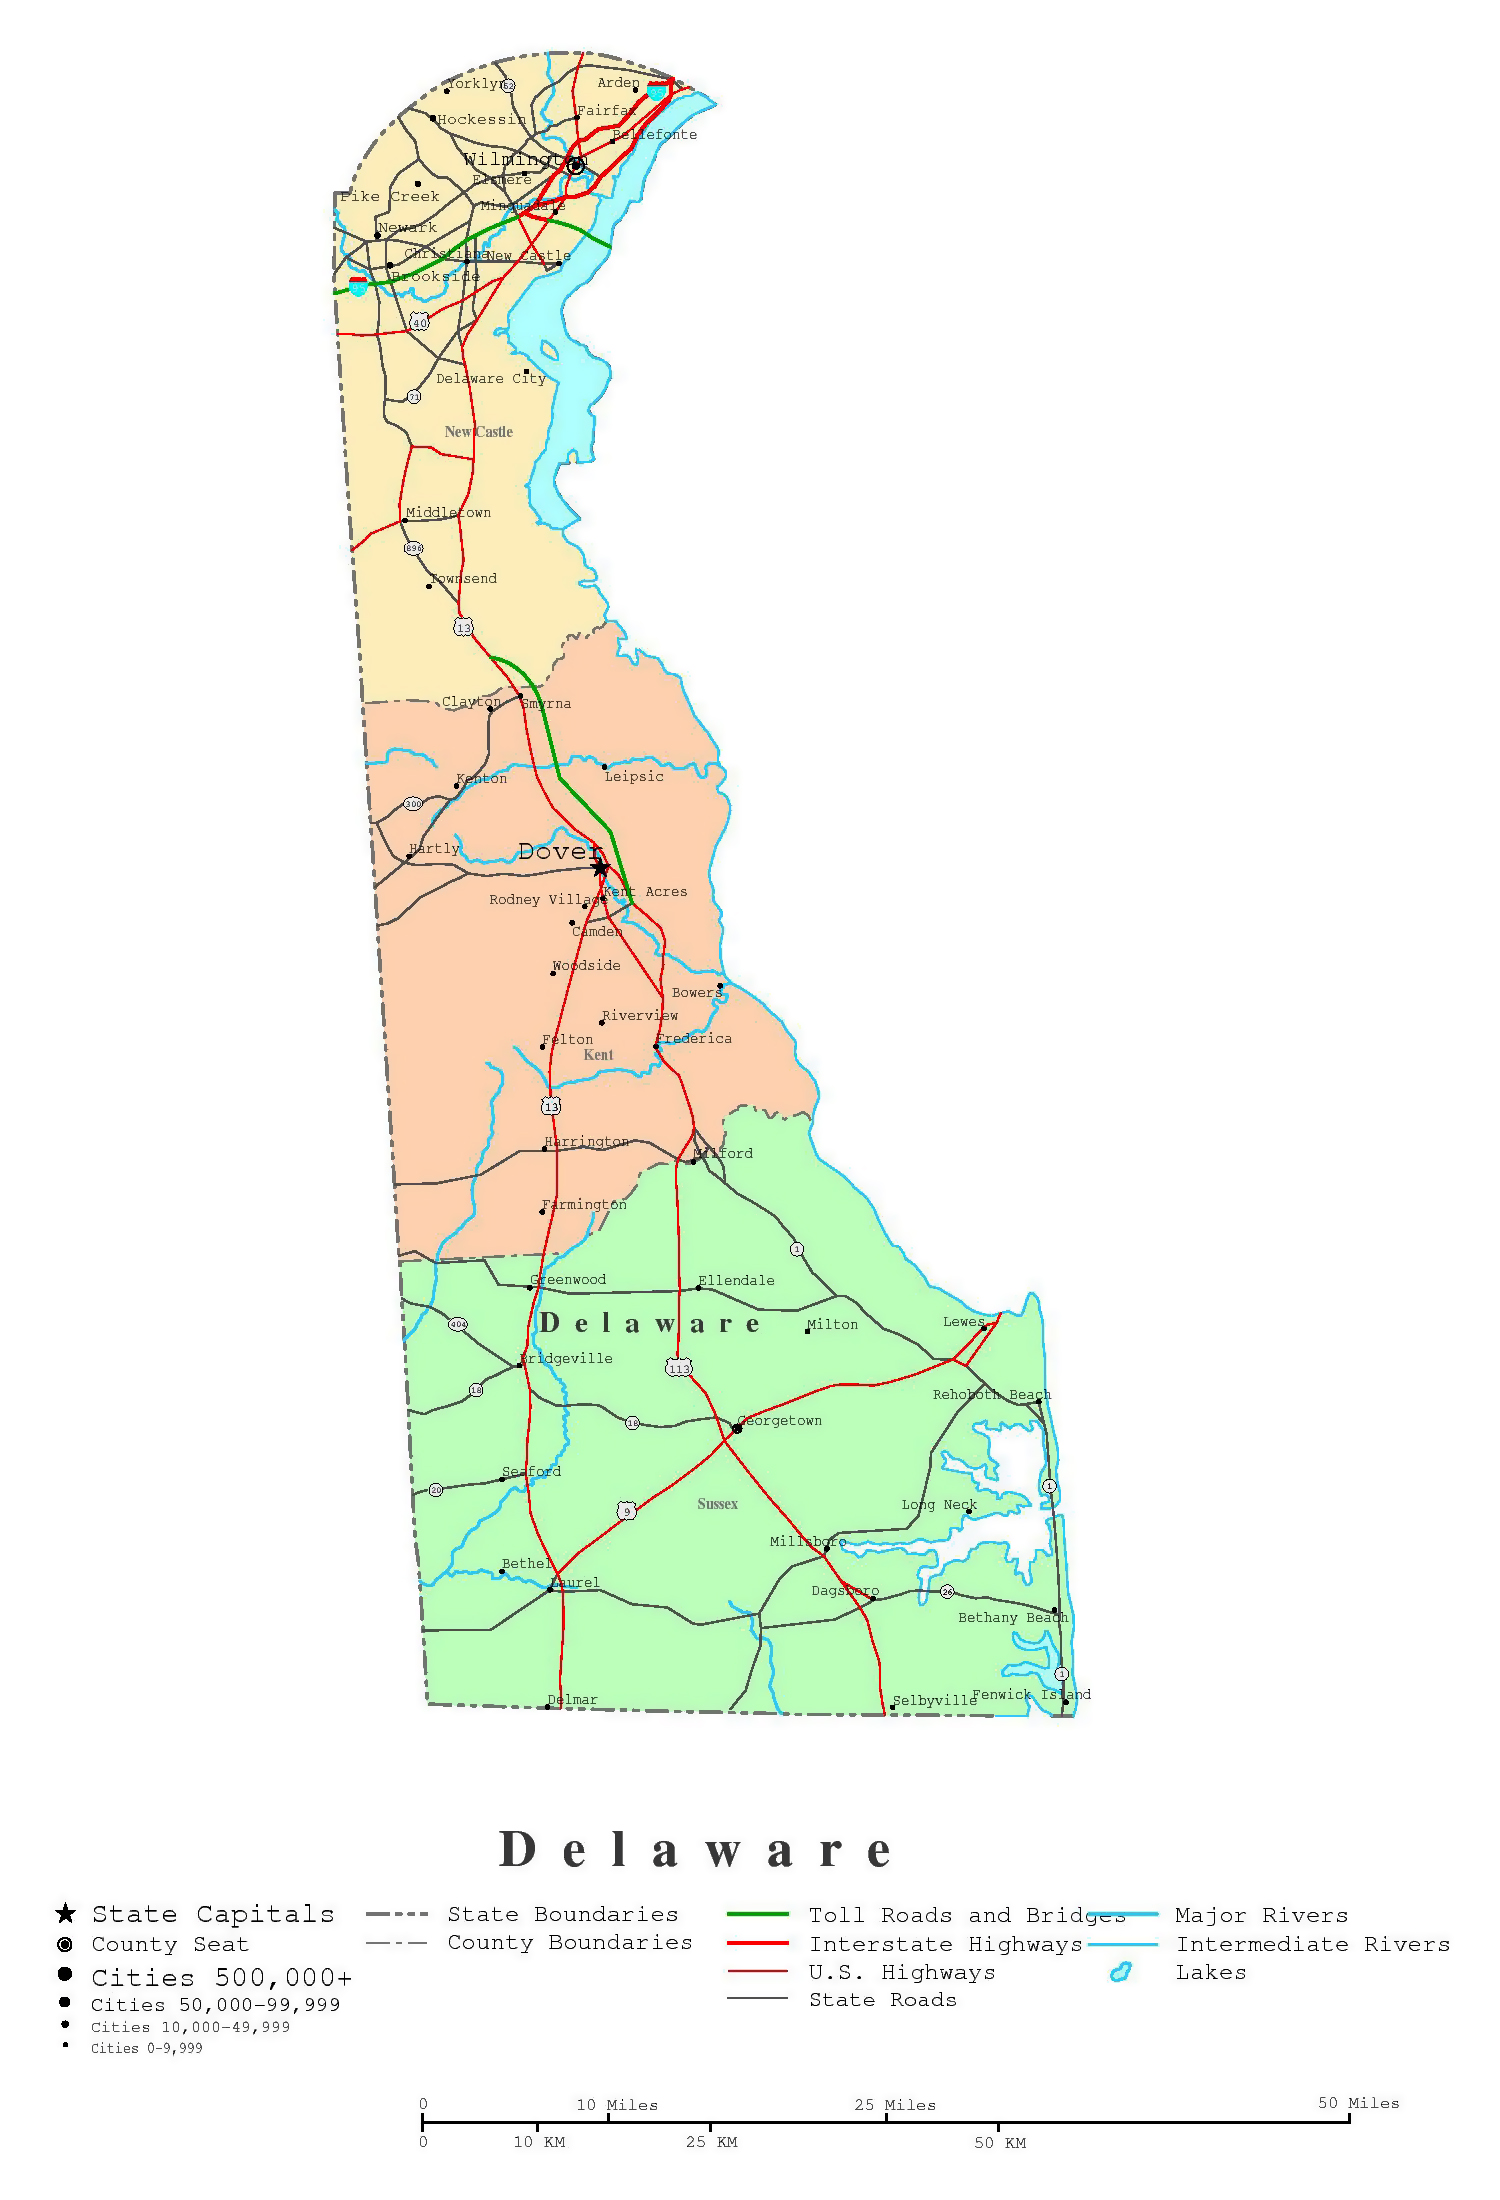 Large Detailed Administrative Map Of Delaware State With Roads Highways And Cities 